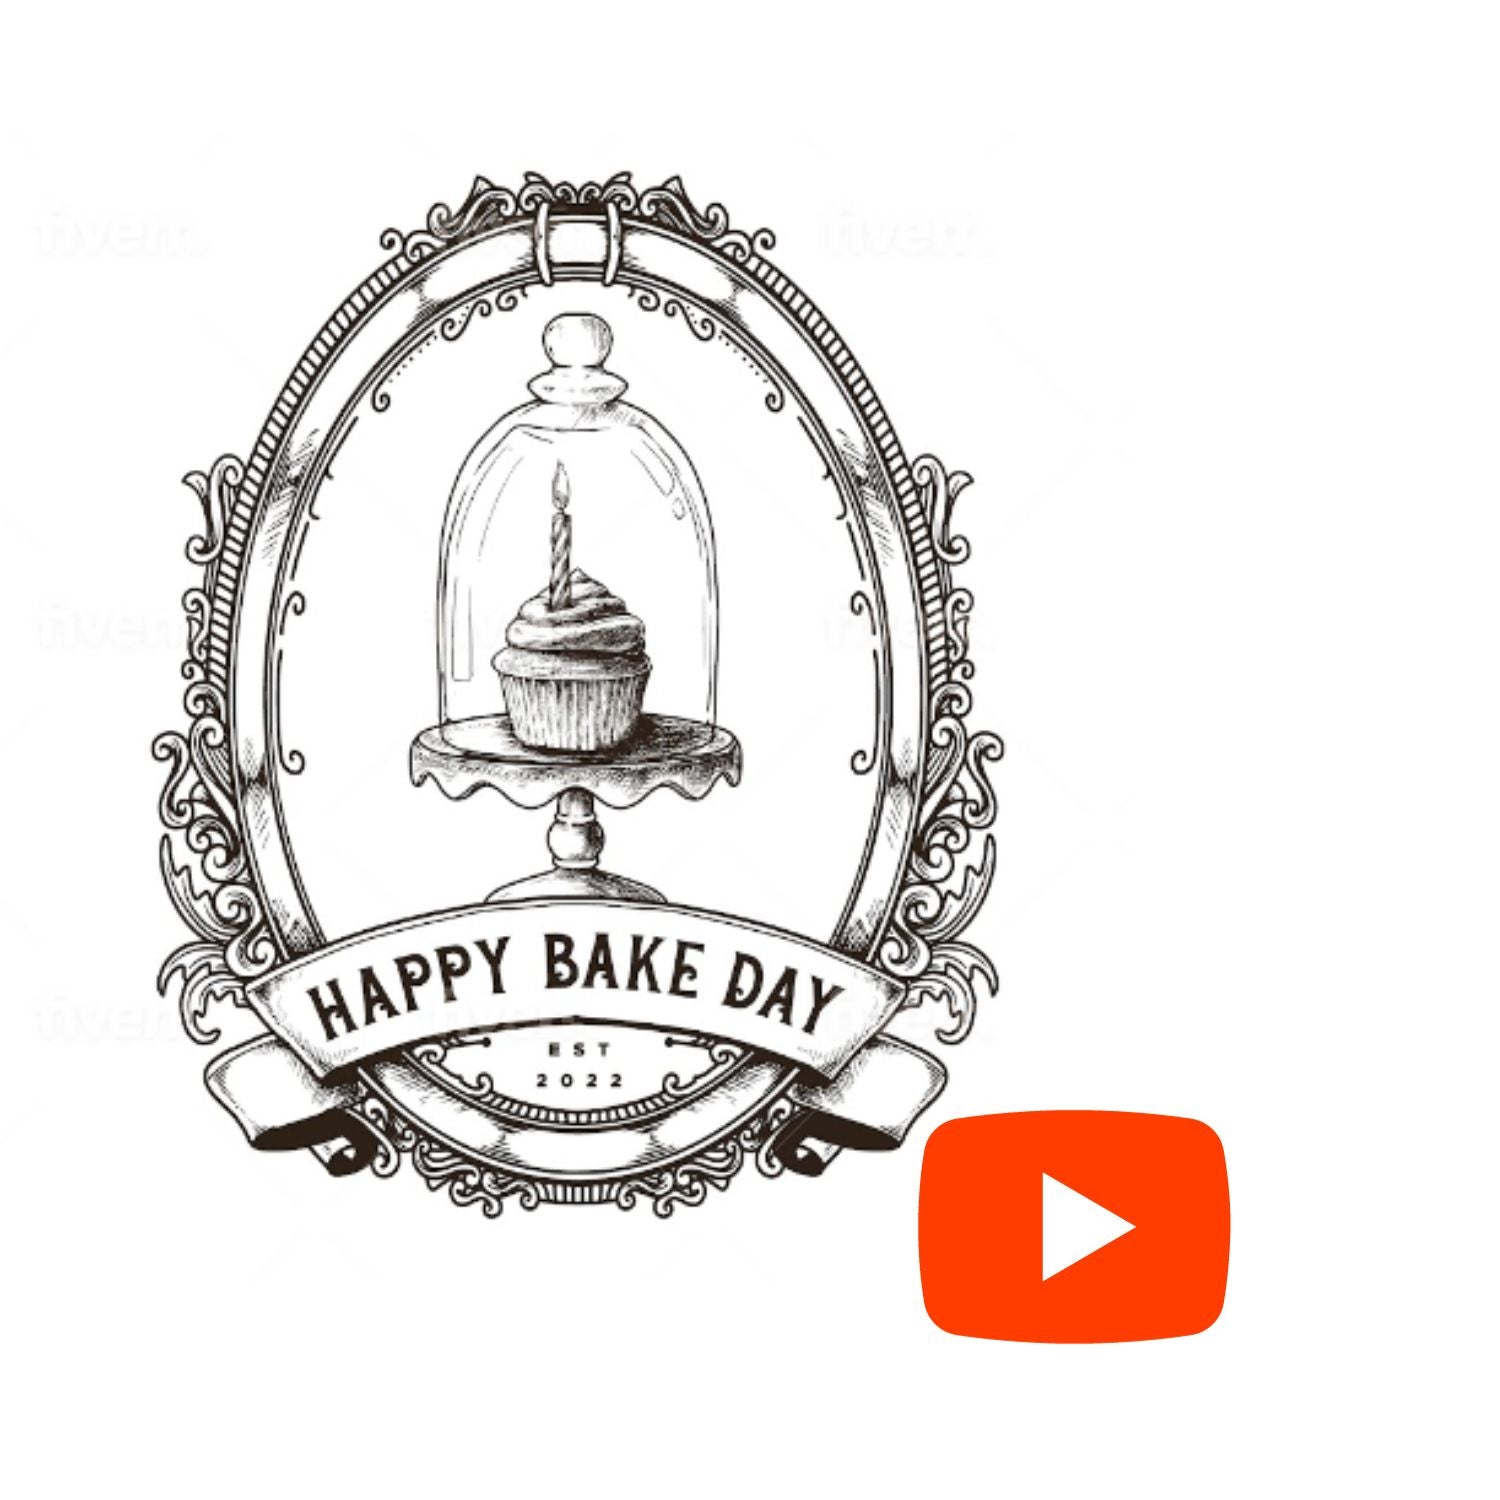 Happy Bake Day Show on YouTube